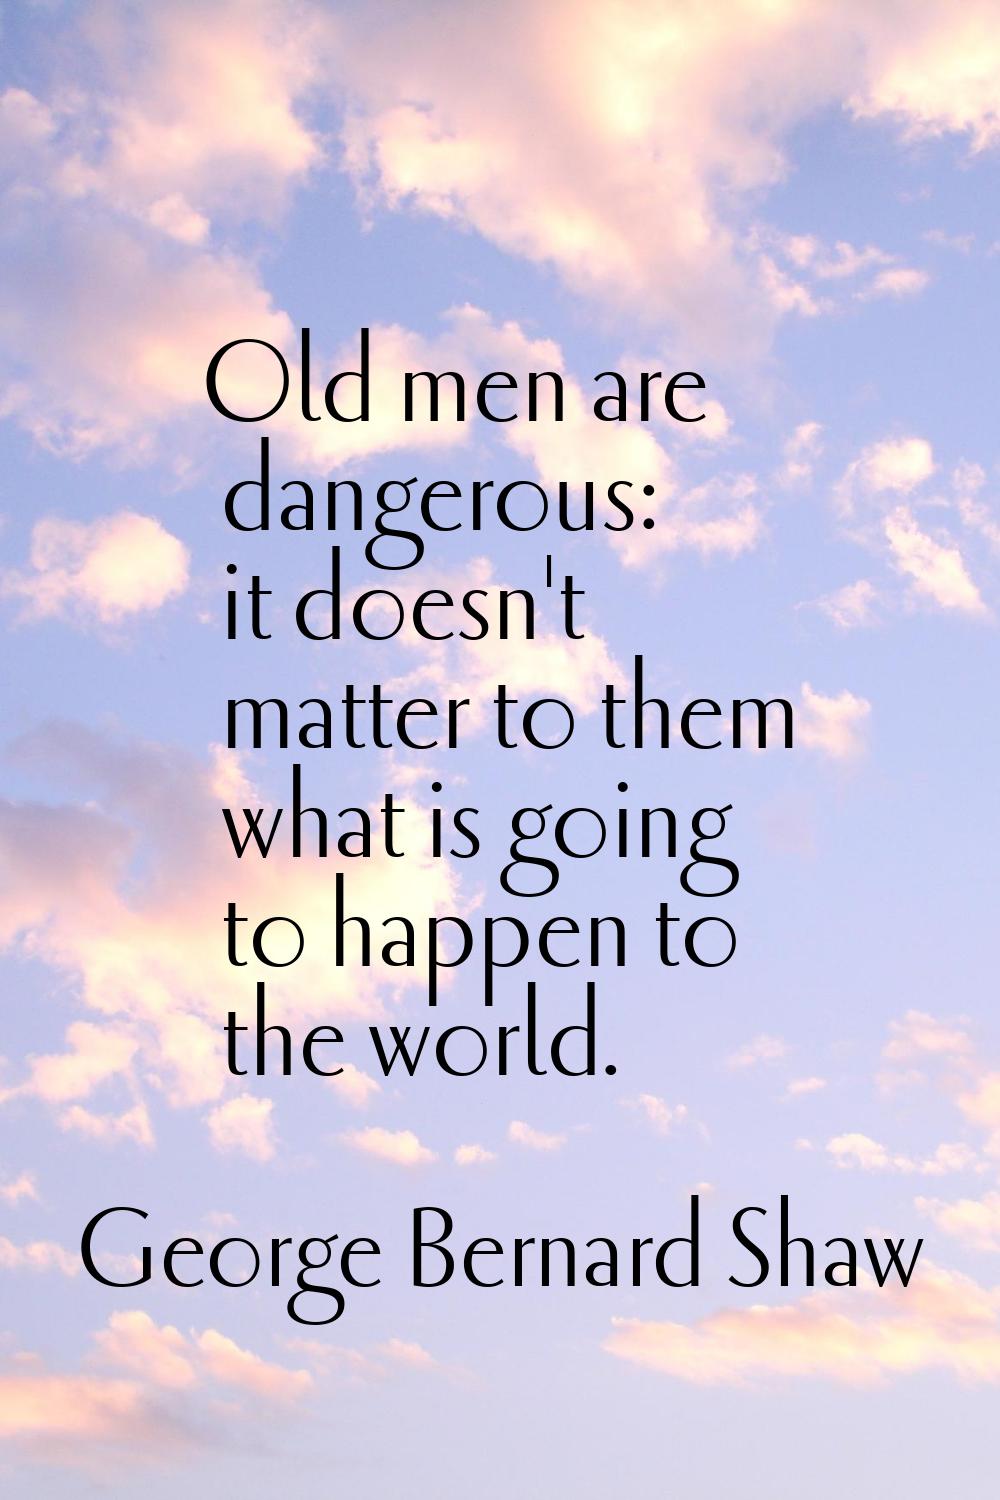 Old men are dangerous: it doesn't matter to them what is going to happen to the world.